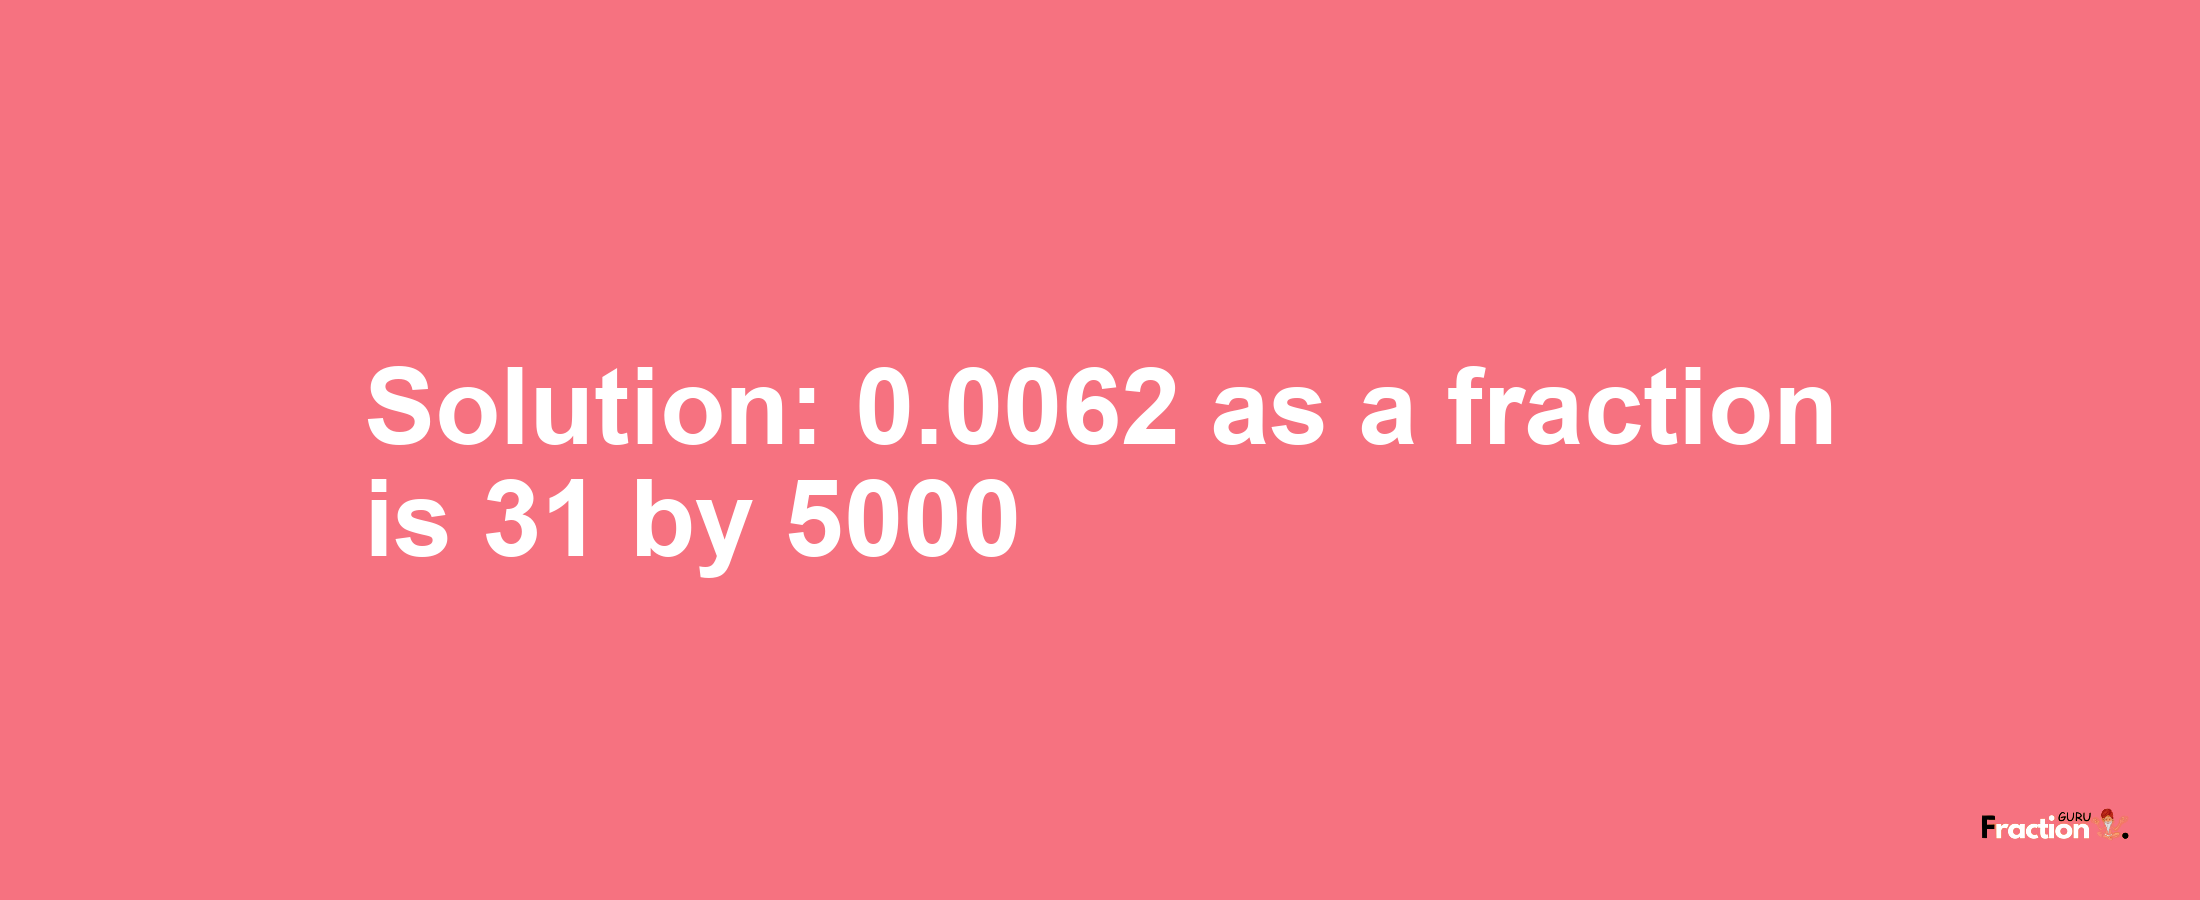 Solution:0.0062 as a fraction is 31/5000